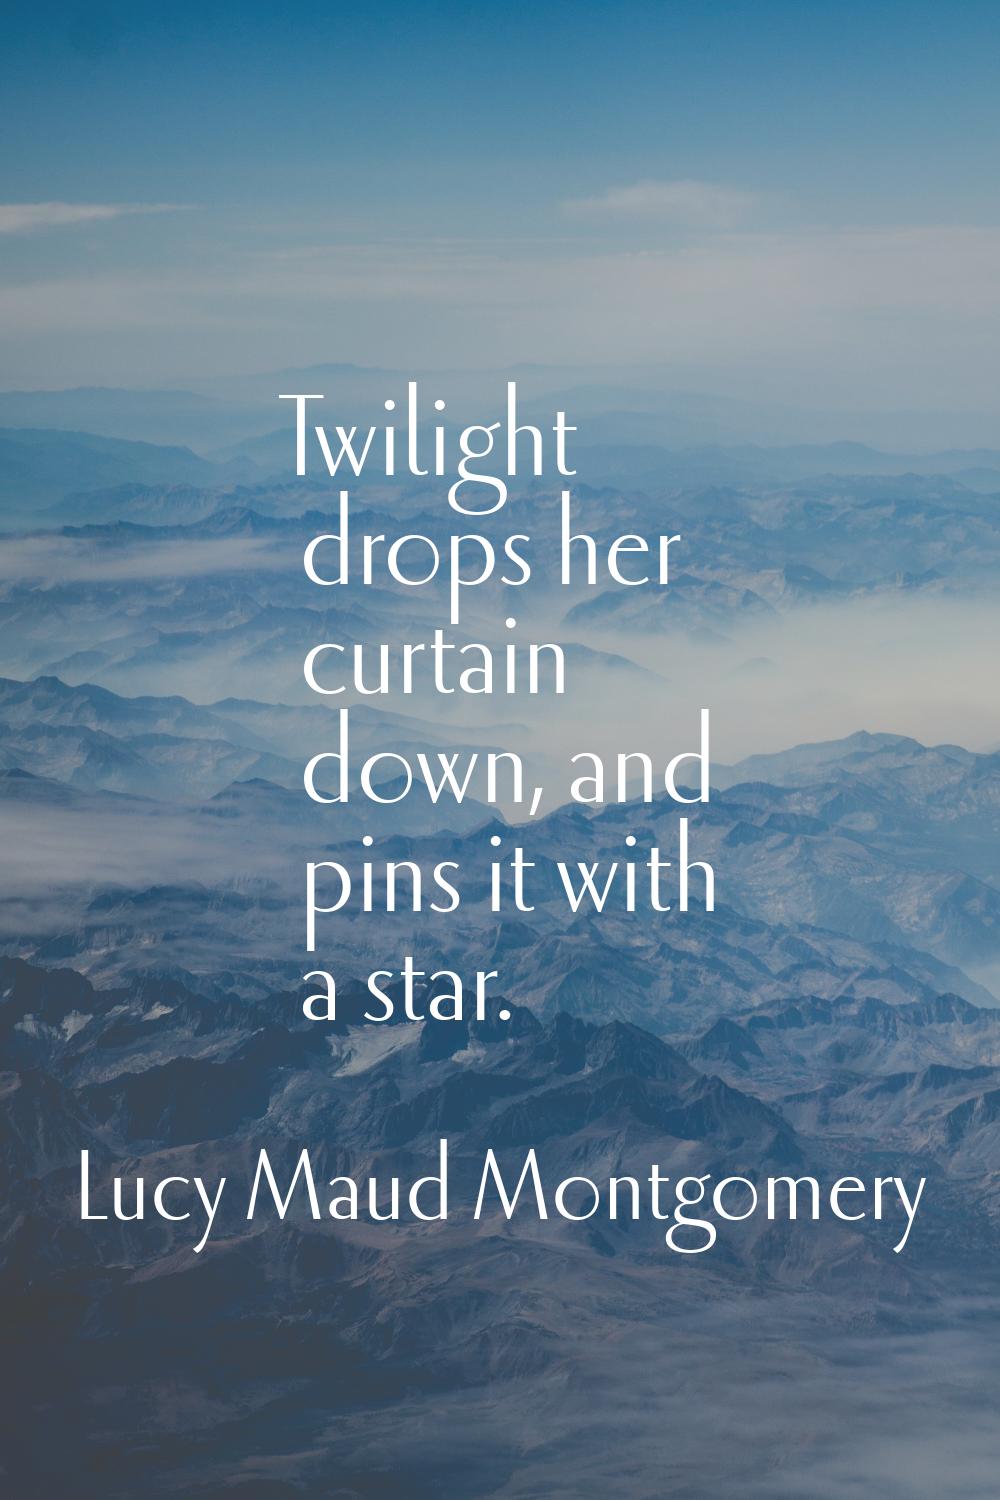 Twilight drops her curtain down, and pins it with a star.